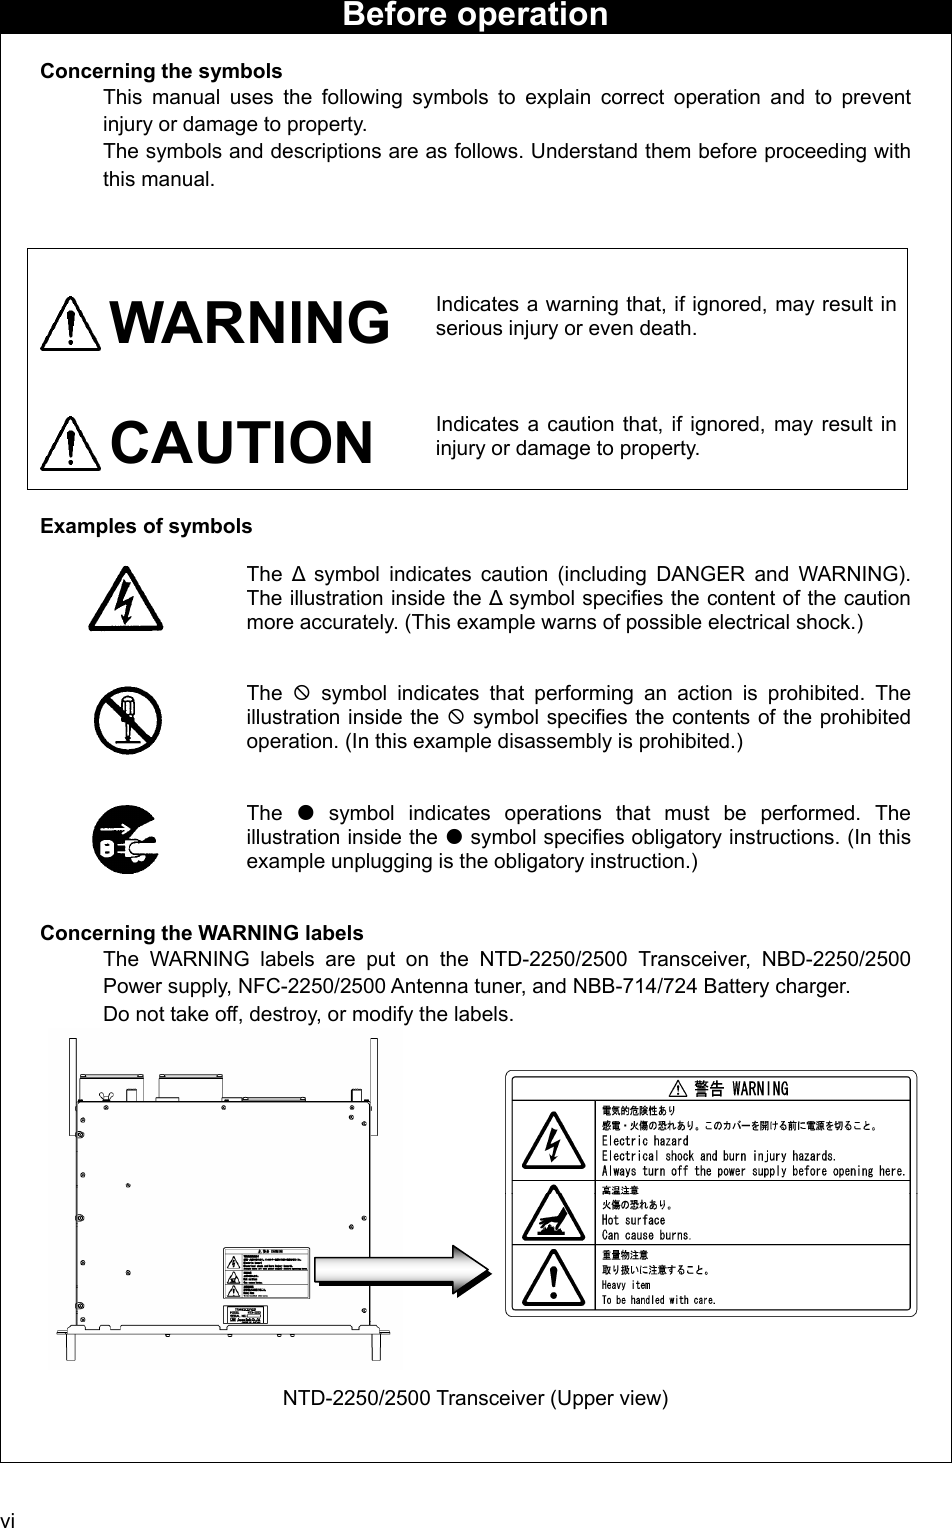 vi  Before operation  Concerning the symbols This manual uses the following symbols to explain correct operation and to prevent injury or damage to property. The symbols and descriptions are as follows. Understand them before proceeding with this manual.   WARNING Indicates a warning that, if ignored, may result in serious injury or even death.    CAUTION Indicates a caution that, if ignored, may result in injury or damage to property.   Examples of symbols  The  Δ symbol indicates caution (including DANGER and WARNING). The illustration inside the Δ symbol specifies the content of the caution more accurately. (This example warns of possible electrical shock.)   The  ; symbol indicates that performing an action is prohibited. The illustration inside the ; symbol specifies the contents of the prohibited operation. (In this example disassembly is prohibited.)   The  z symbol indicates operations that must be performed. The illustration inside the z symbol specifies obligatory instructions. (In this example unplugging is the obligatory instruction.)   Concerning the WARNING labels The WARNING labels are put on the NTD-2250/2500 Transceiver, NBD-2250/2500 Power supply, NFC-2250/2500 Antenna tuner, and NBB-714/724 Battery charger.   Do not take off, destroy, or modify the labels.                NTD-2250/2500 Transceiver (Upper view)  